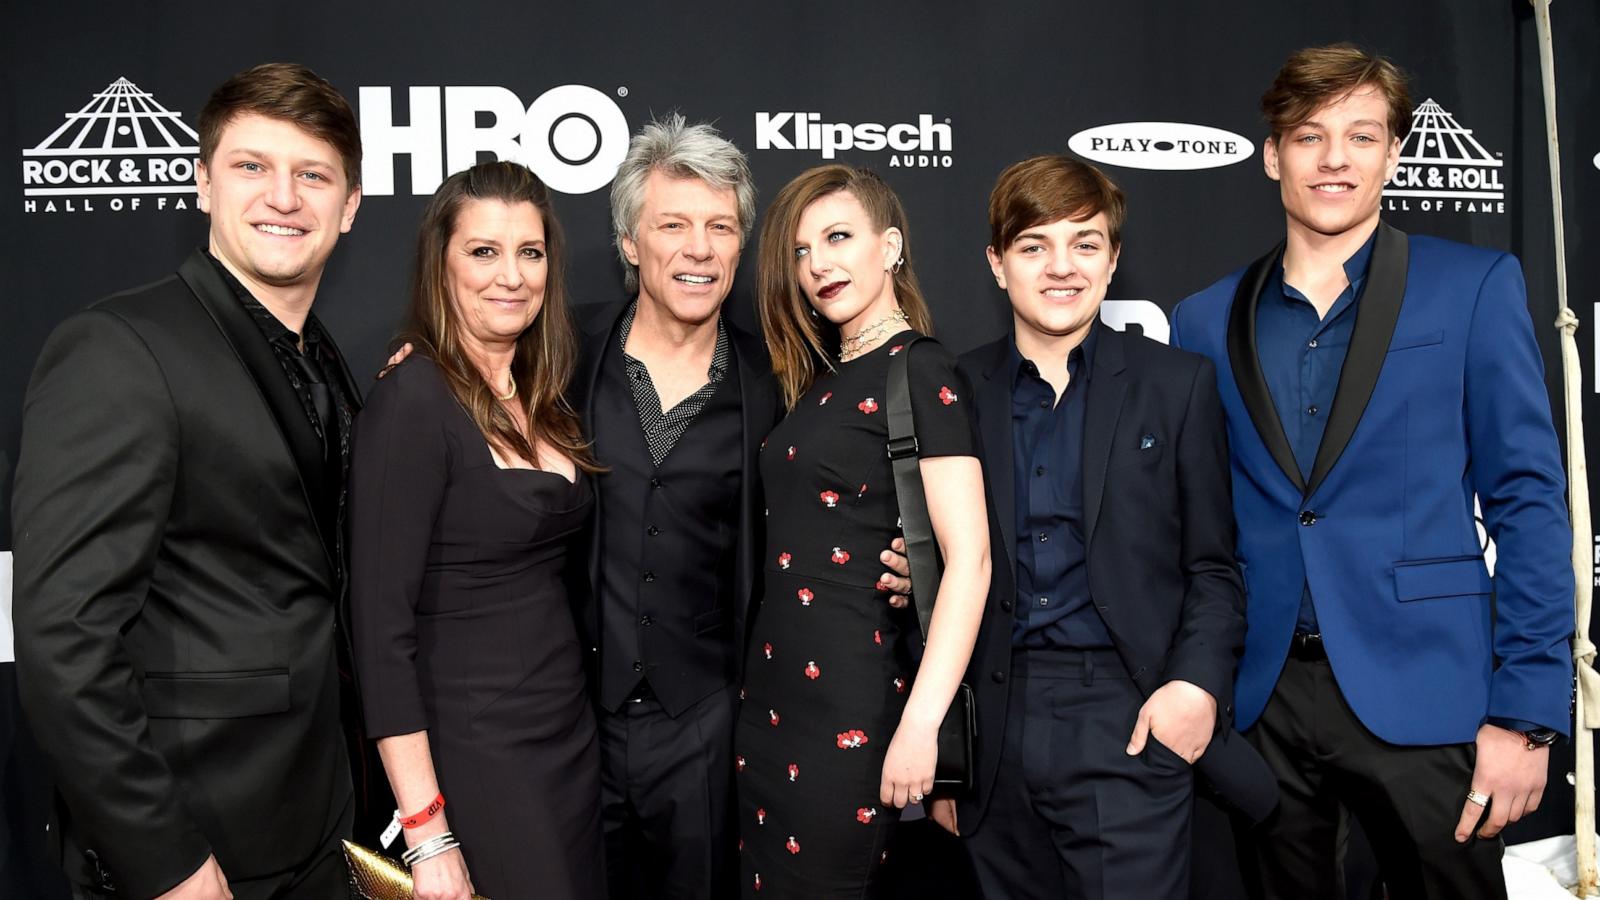 PHOTO: Inductee Jon Bon Jovi and family attend the 33rd Annual Rock & Roll Hall of Fame Induction Ceremony at Public Auditorium on April 14, 2018 in Cleveland, Ohio.